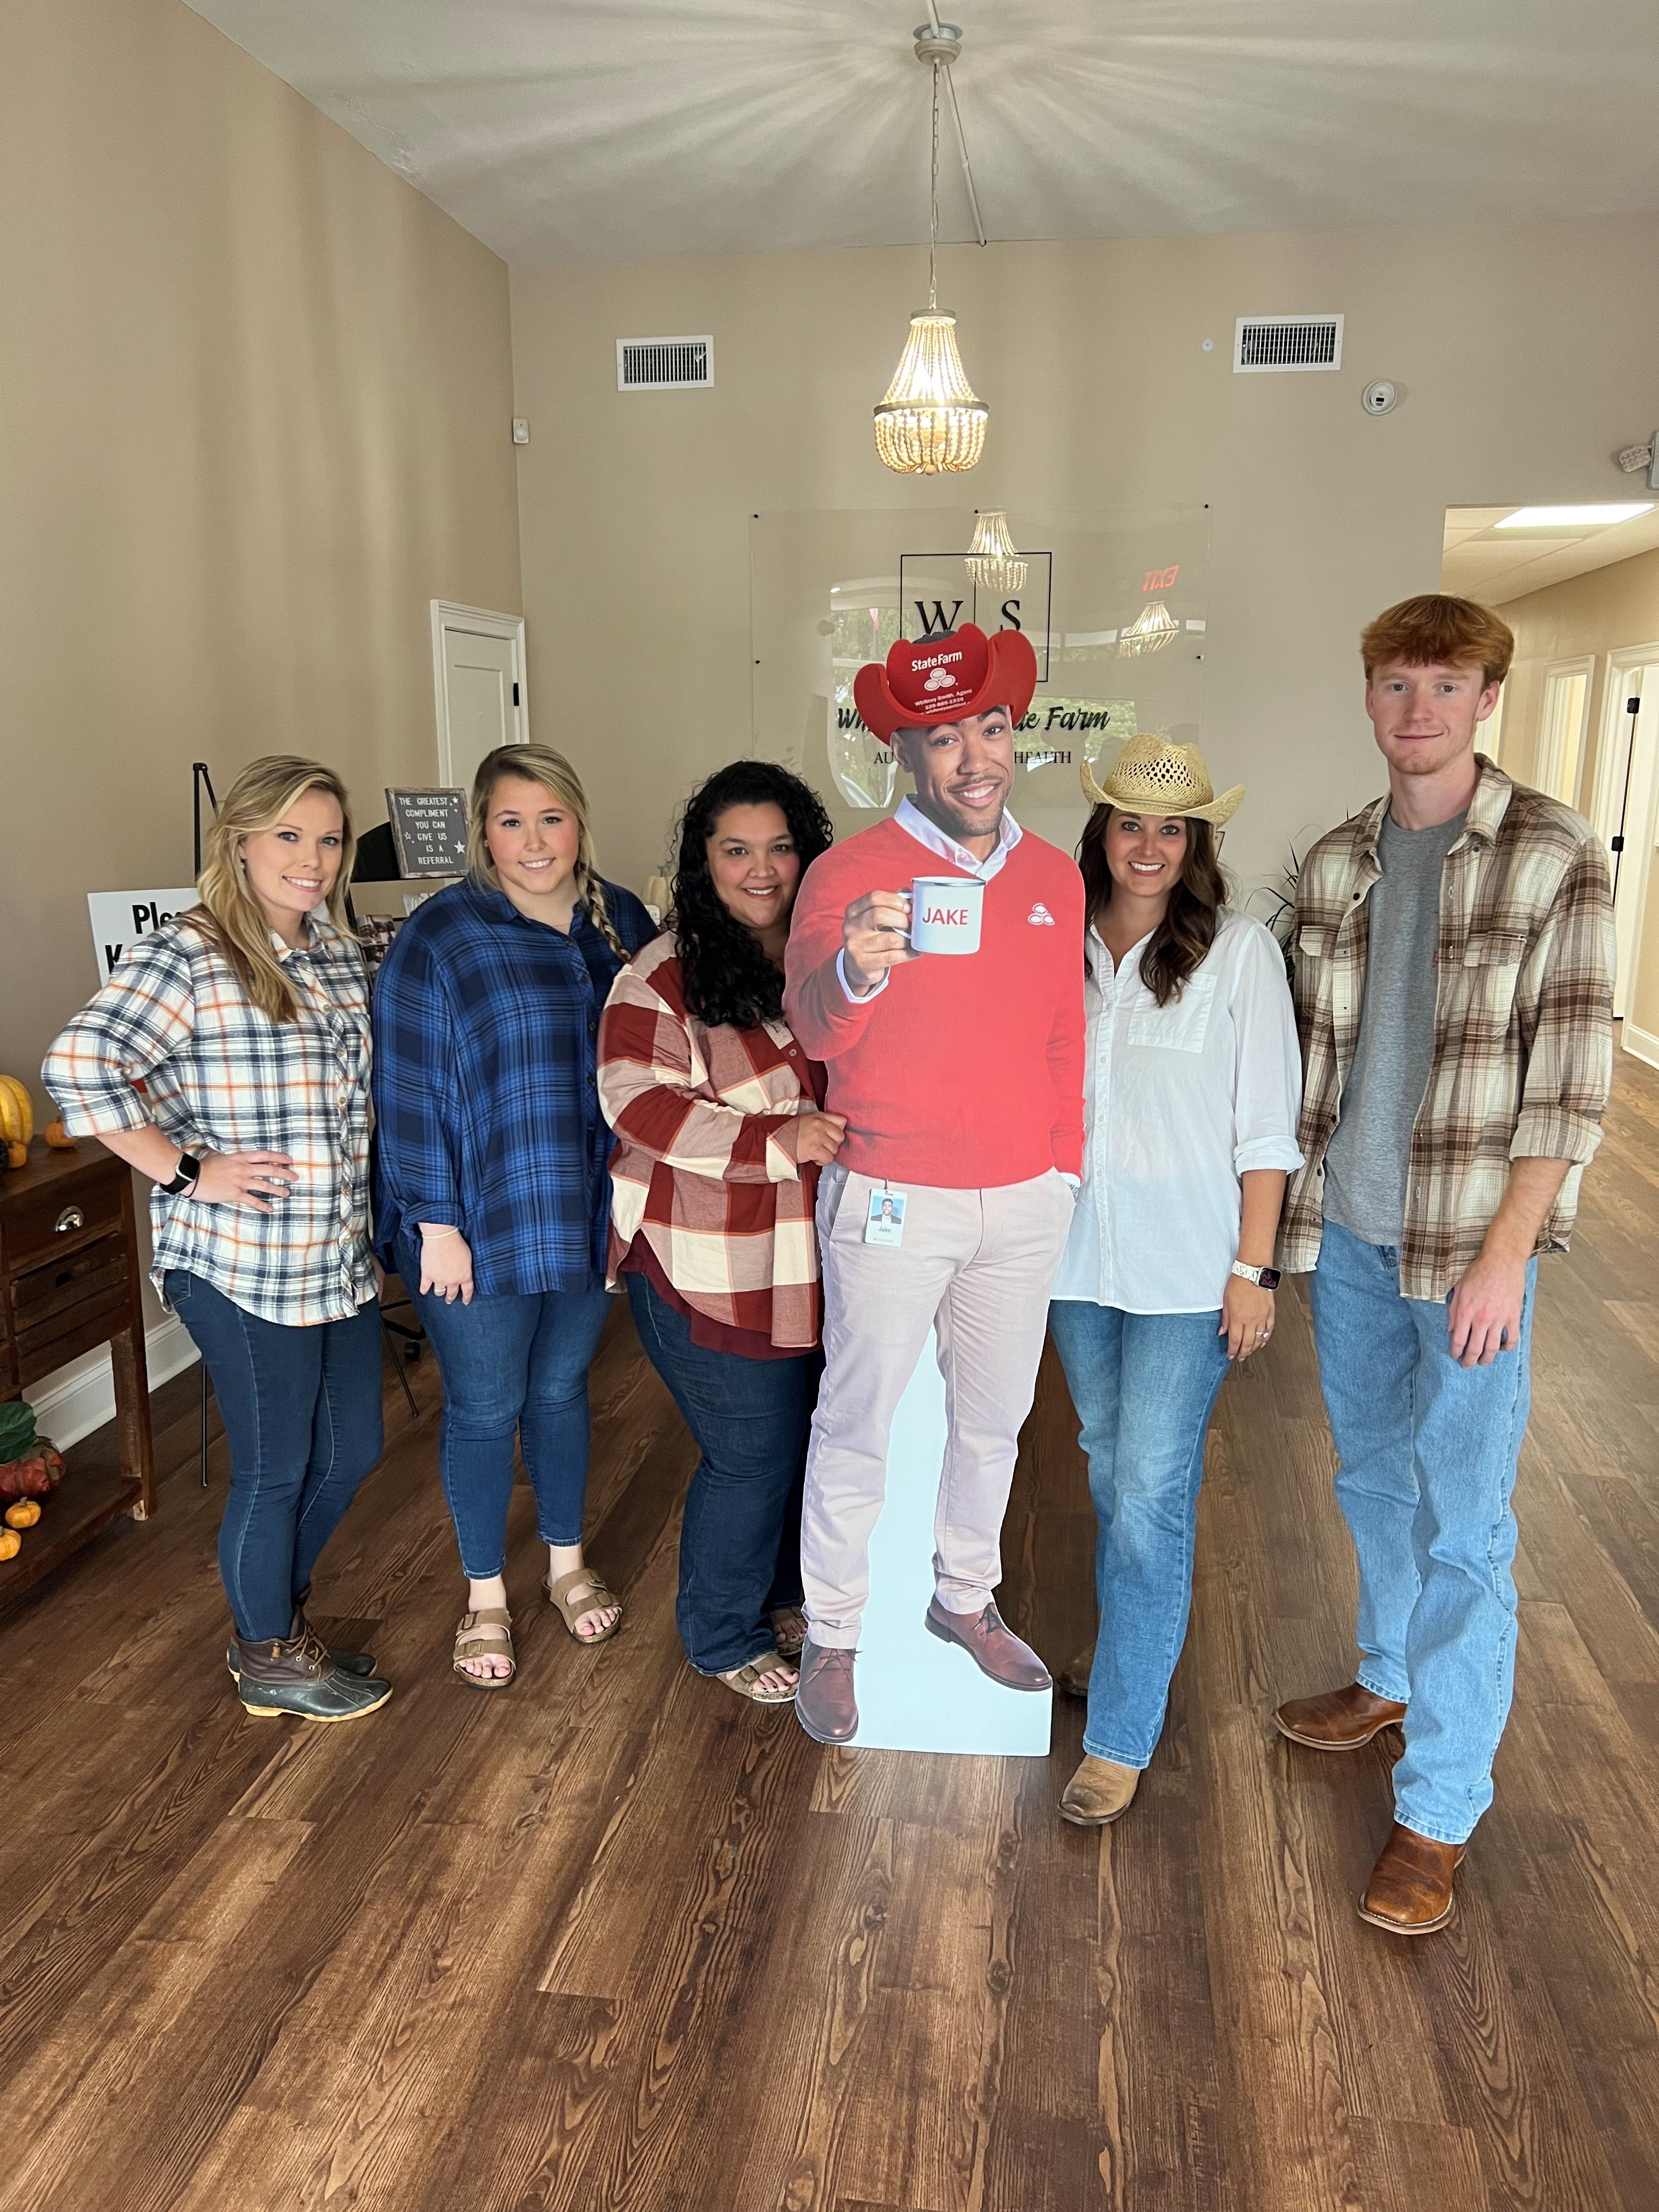 The Whitney Smith State Farm Insurance team Moultrie, GA